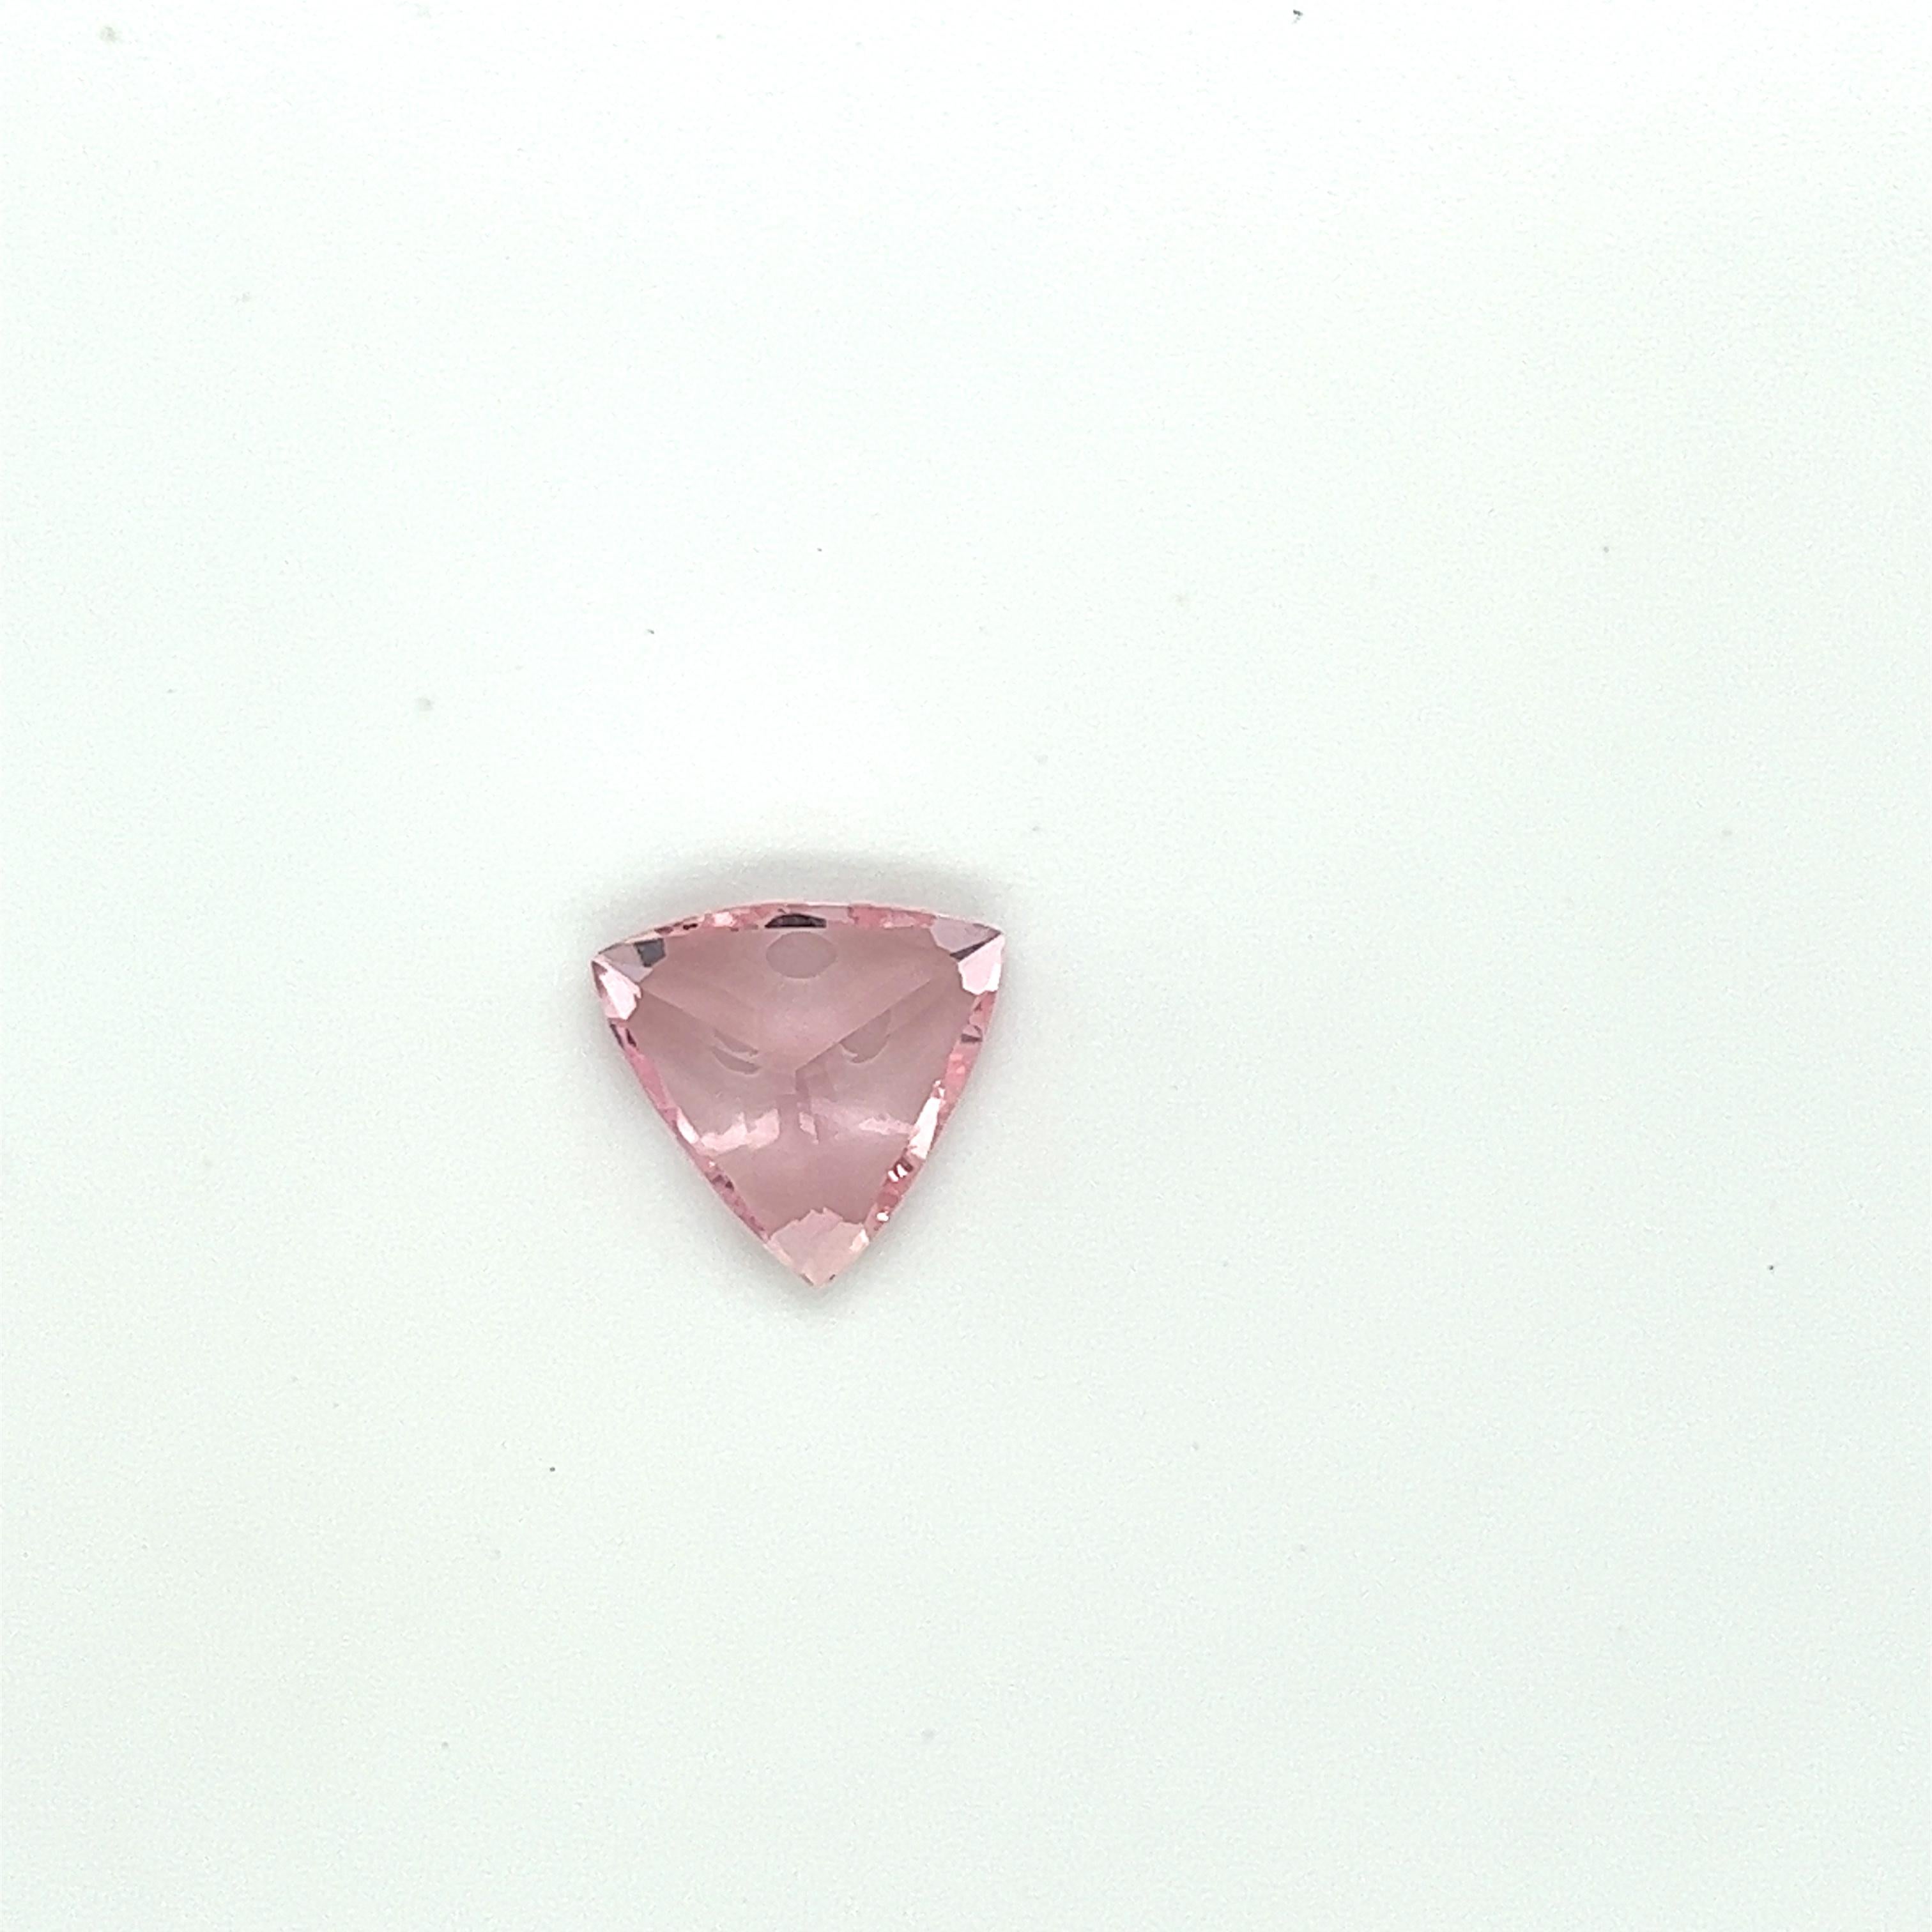 Women's or Men's 4.80 Cts Natural Morganite Trillion Cut Loose Gemstone Jewellery       For Sale